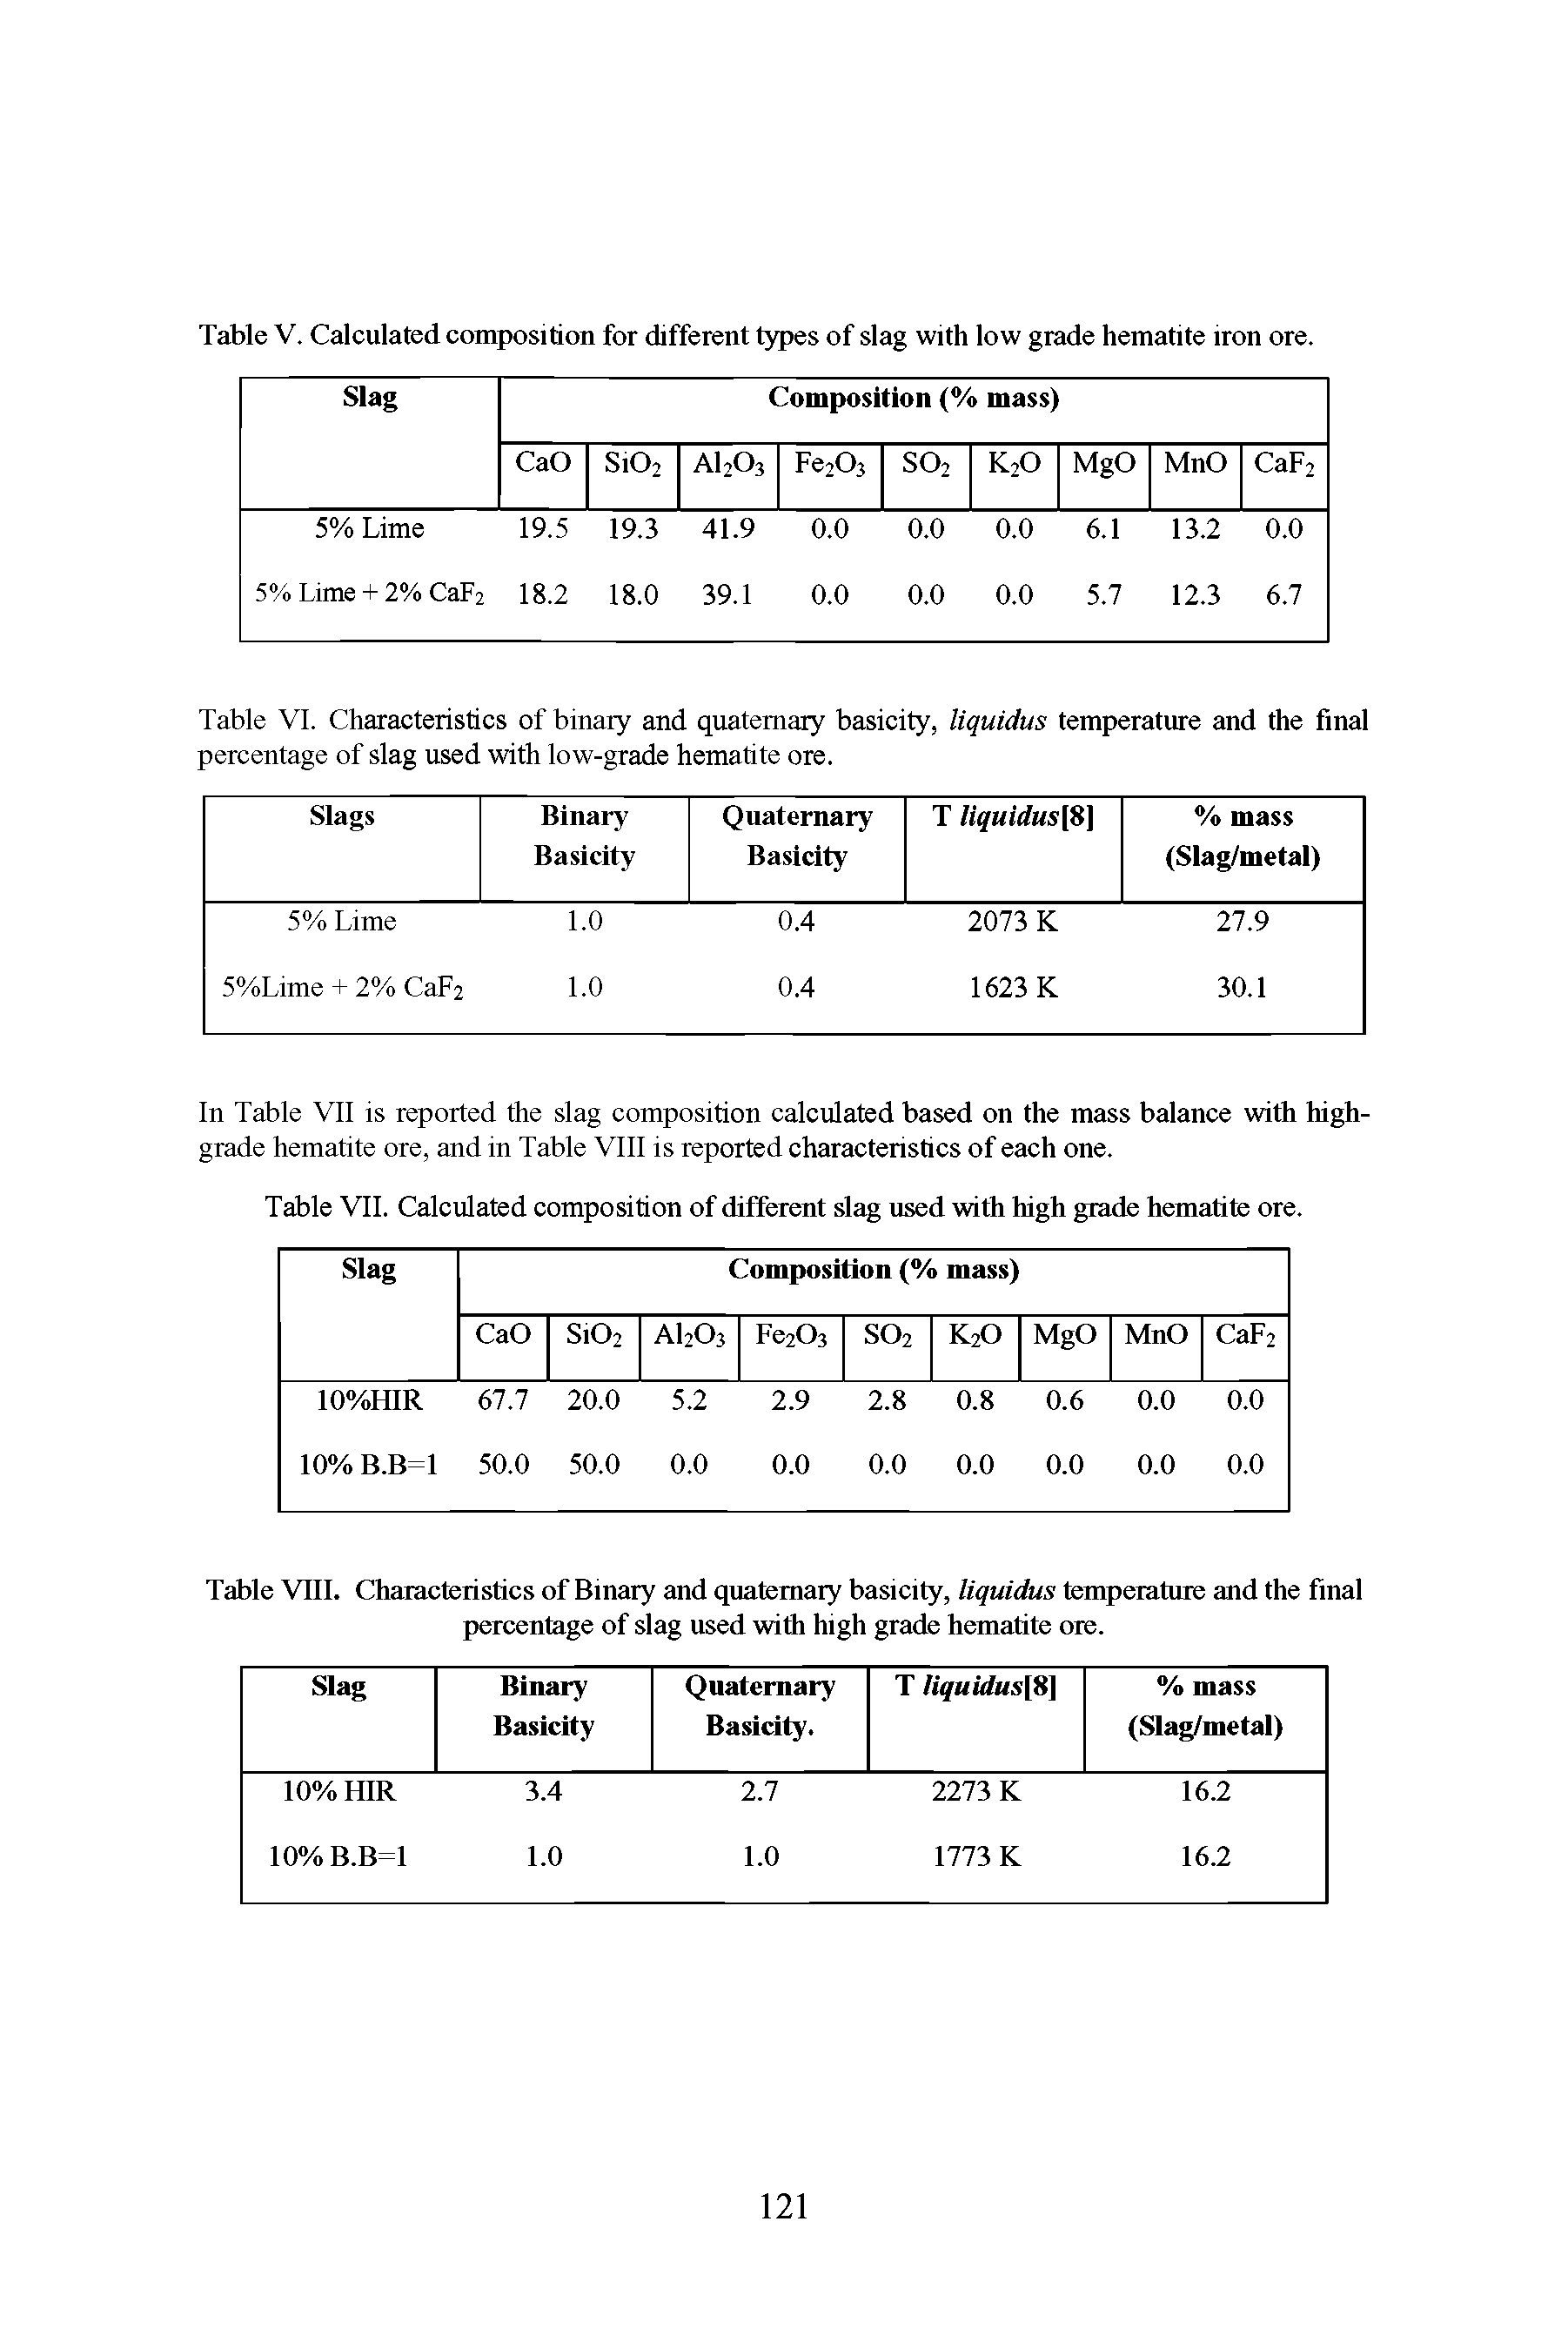 Table VI. Characteristics of binary and quaternary basicity, liquidus temperature and the final percentage of slag used with low-grade hematite ore.